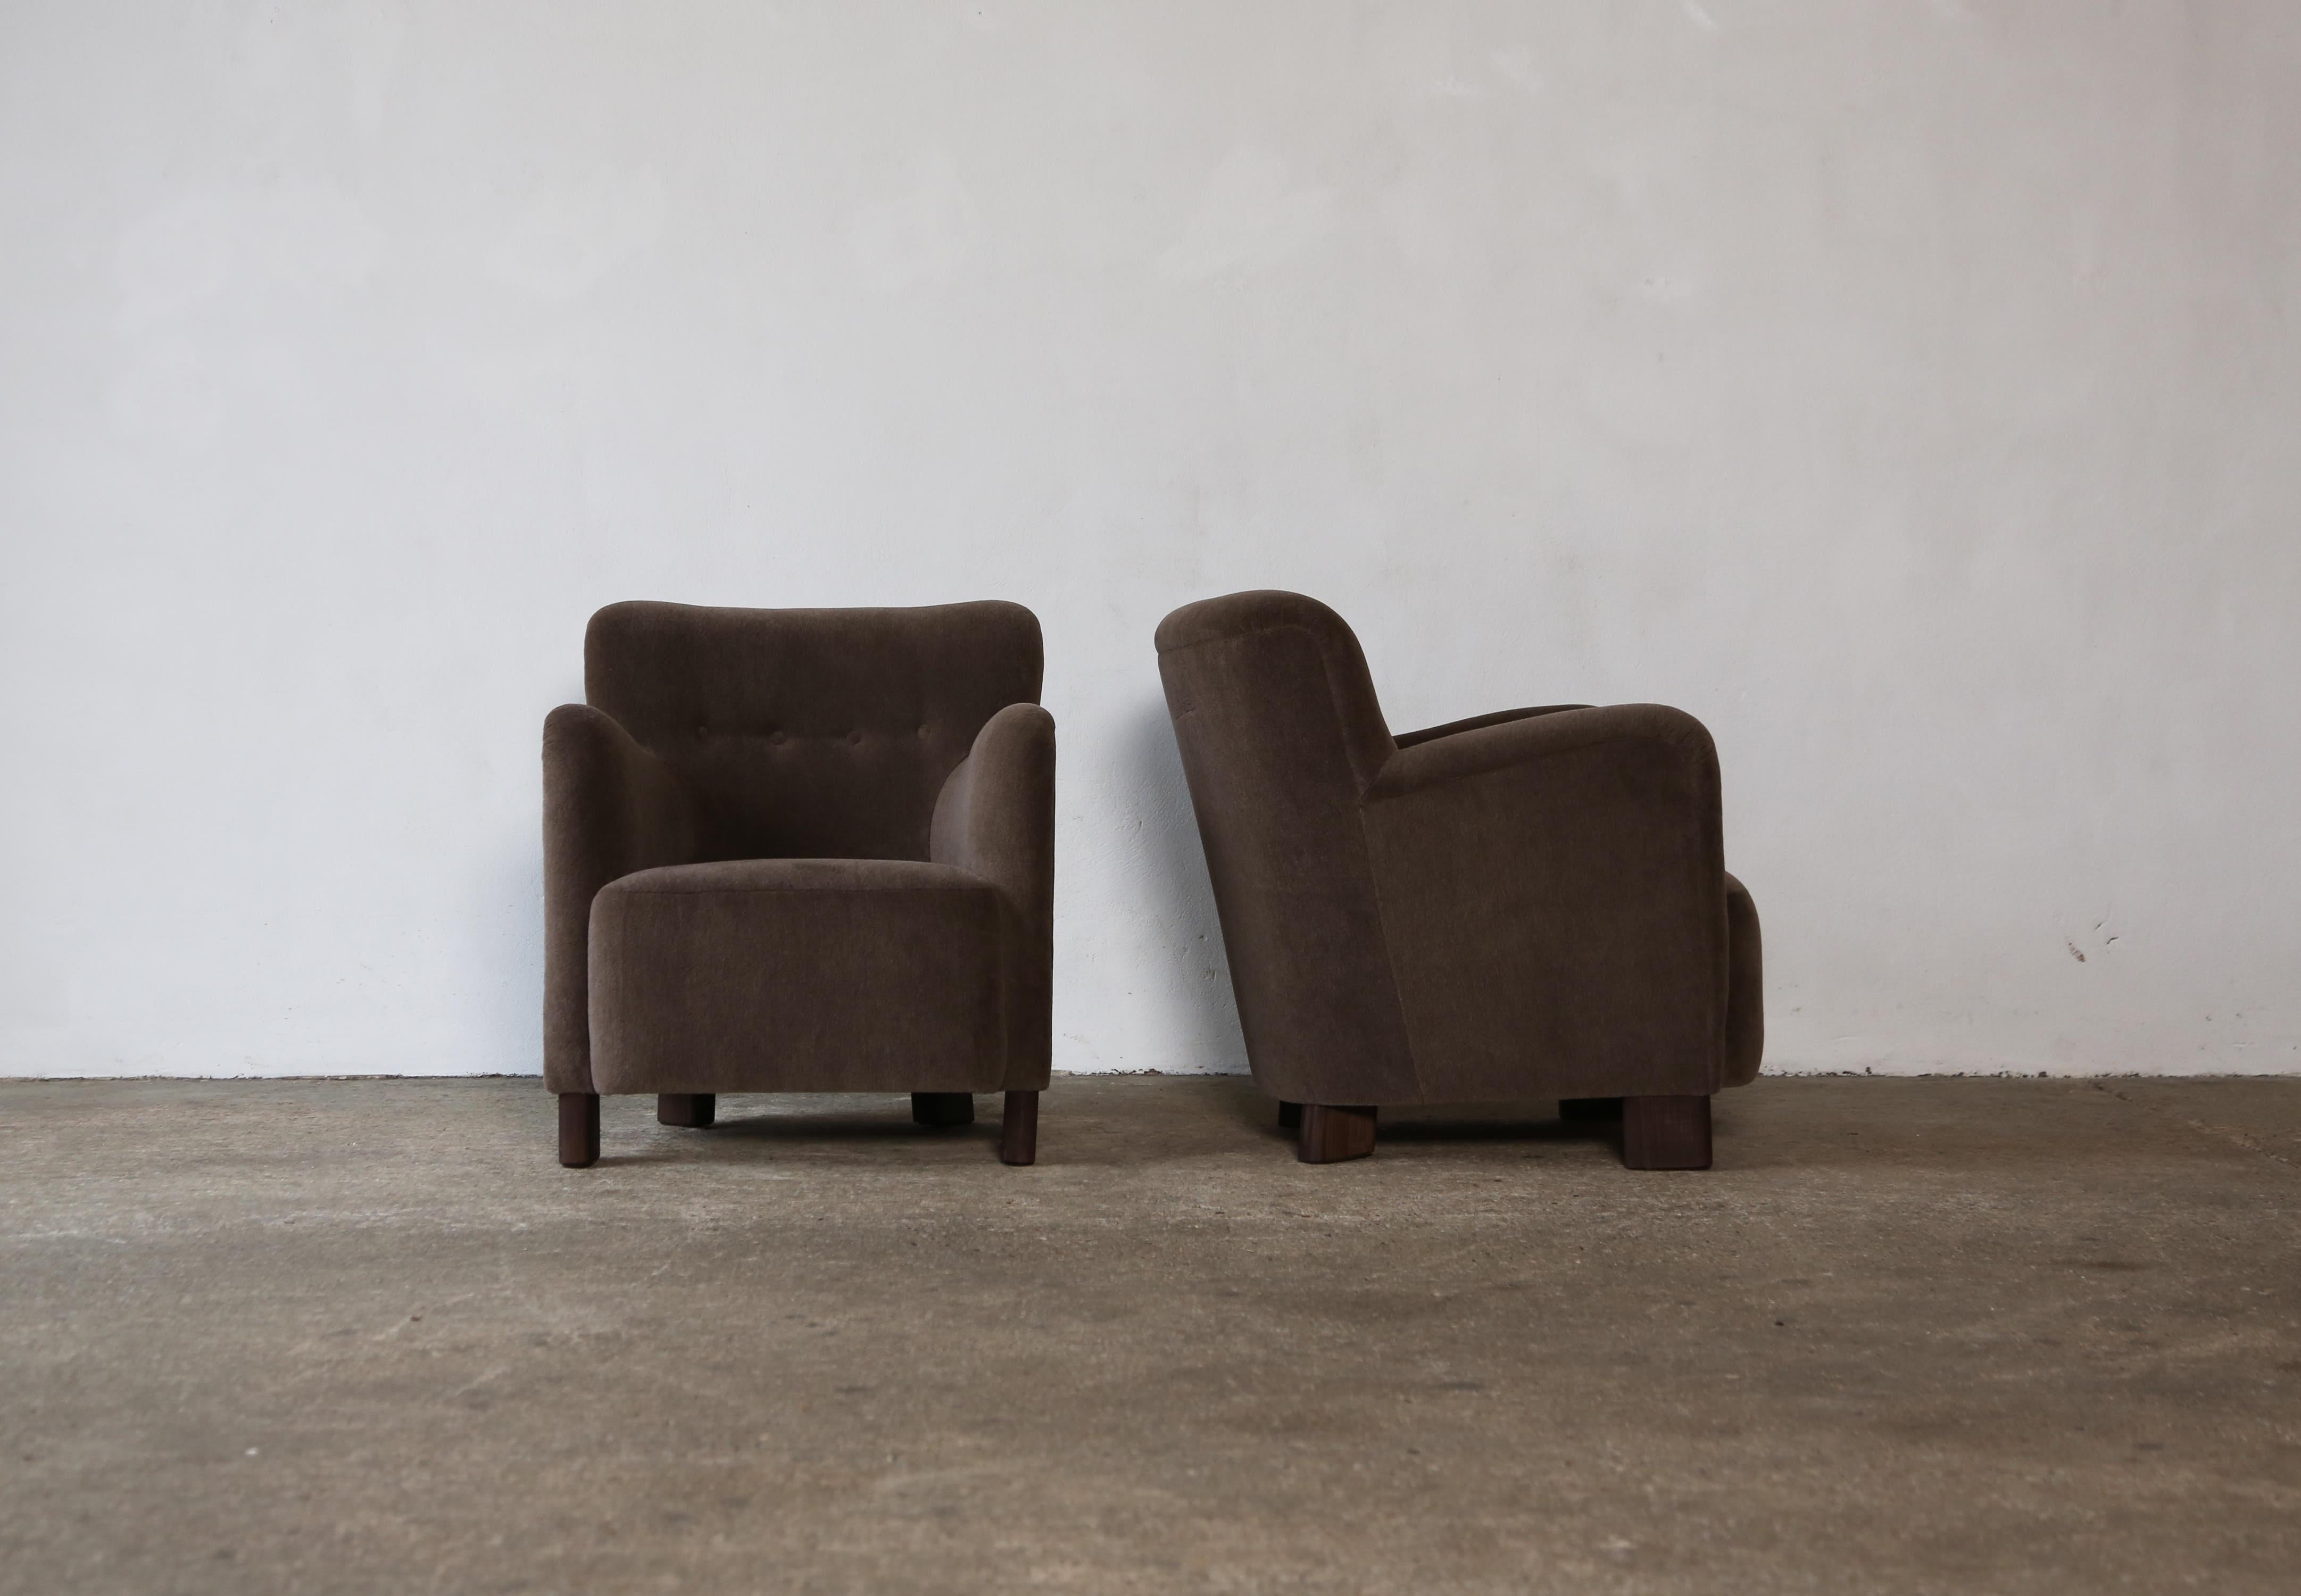 Elegant Pair of Lounge Chairs, Upholstered in Deep Brown Pure Alpaca In Good Condition For Sale In London, GB